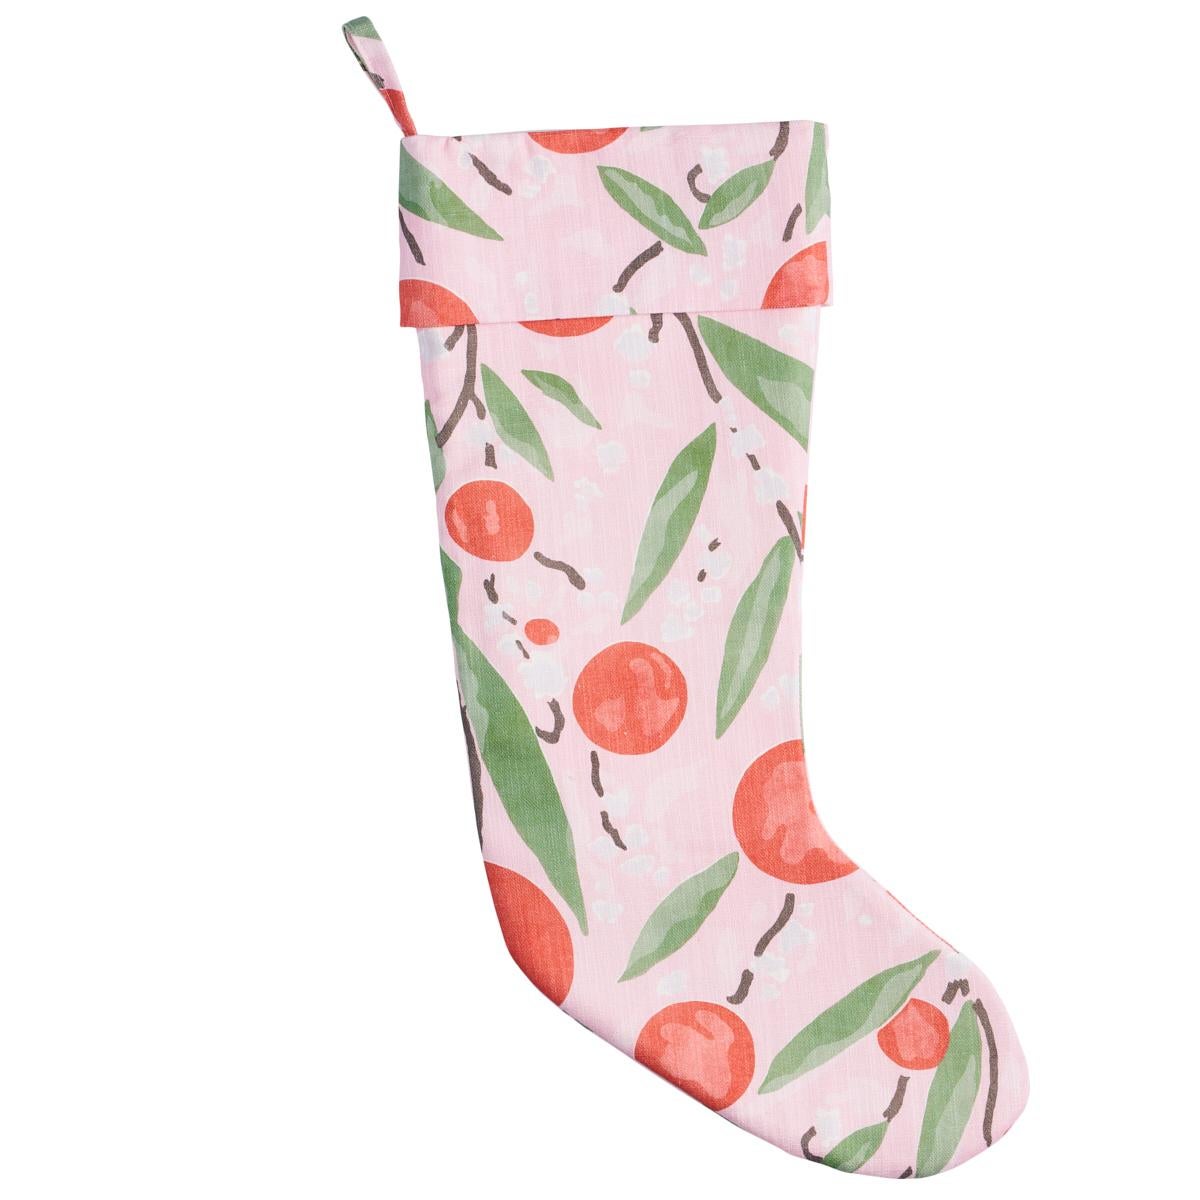 Cheerful lollipop flowers and stylized leaves give this limited-edition holiday stocking a fresh, contemporary feel. Fashioned out of Schumacher’s Mirabelle fabric, a delightful 1920s pattern with a painterly warmth, it’s lined with a cotton-linen